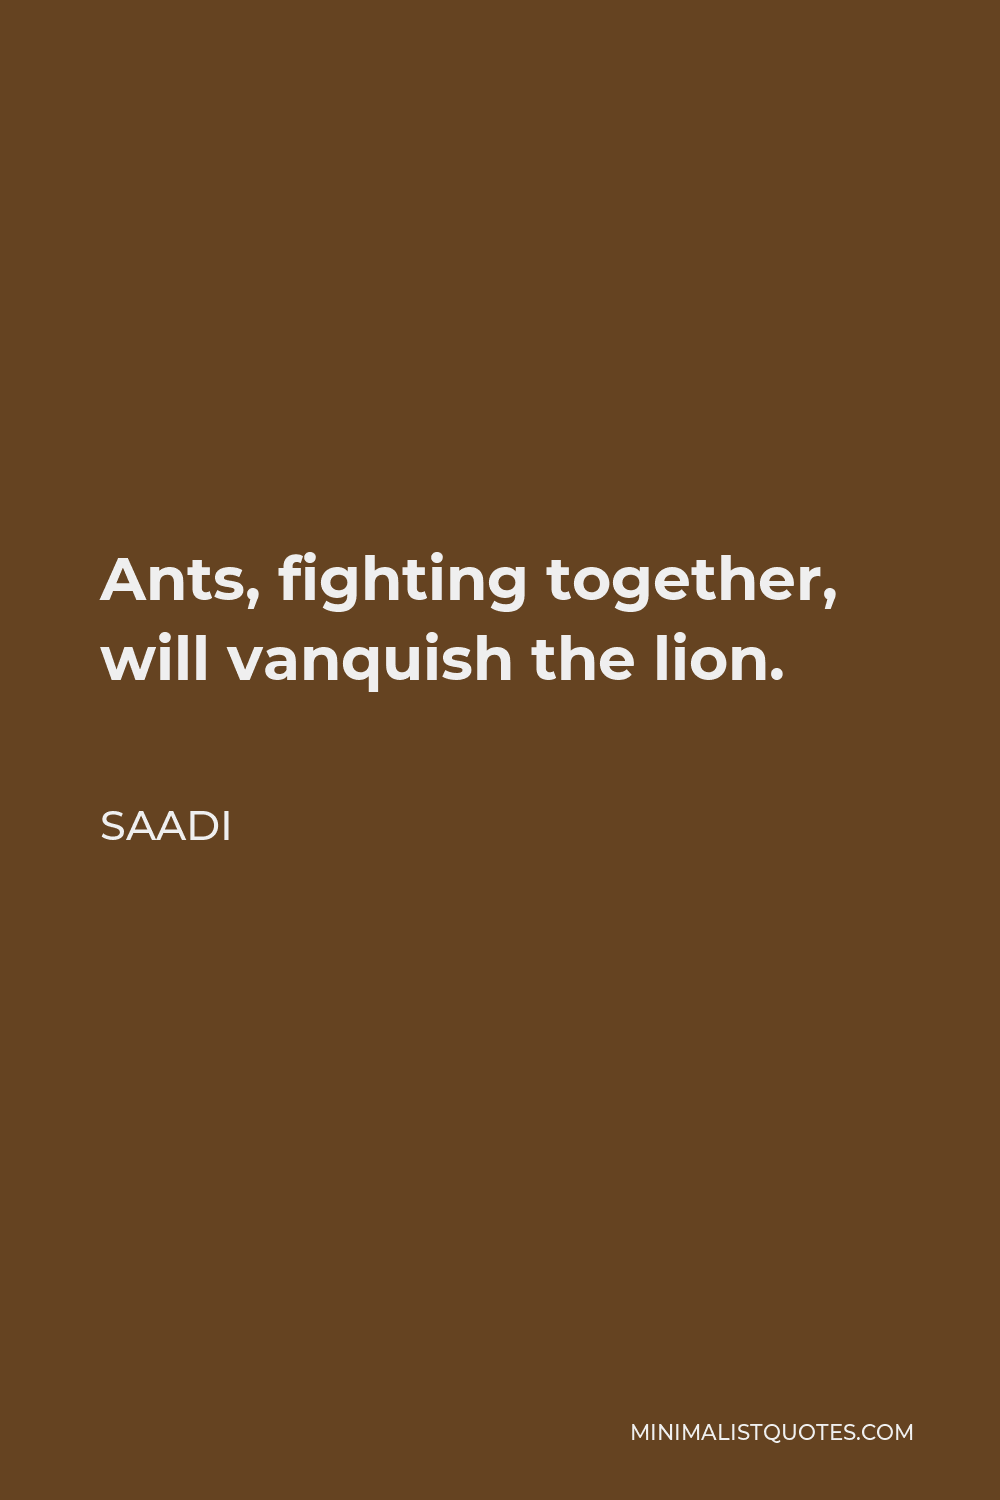 Saadi Quote - Ants, fighting together, will vanquish the lion.